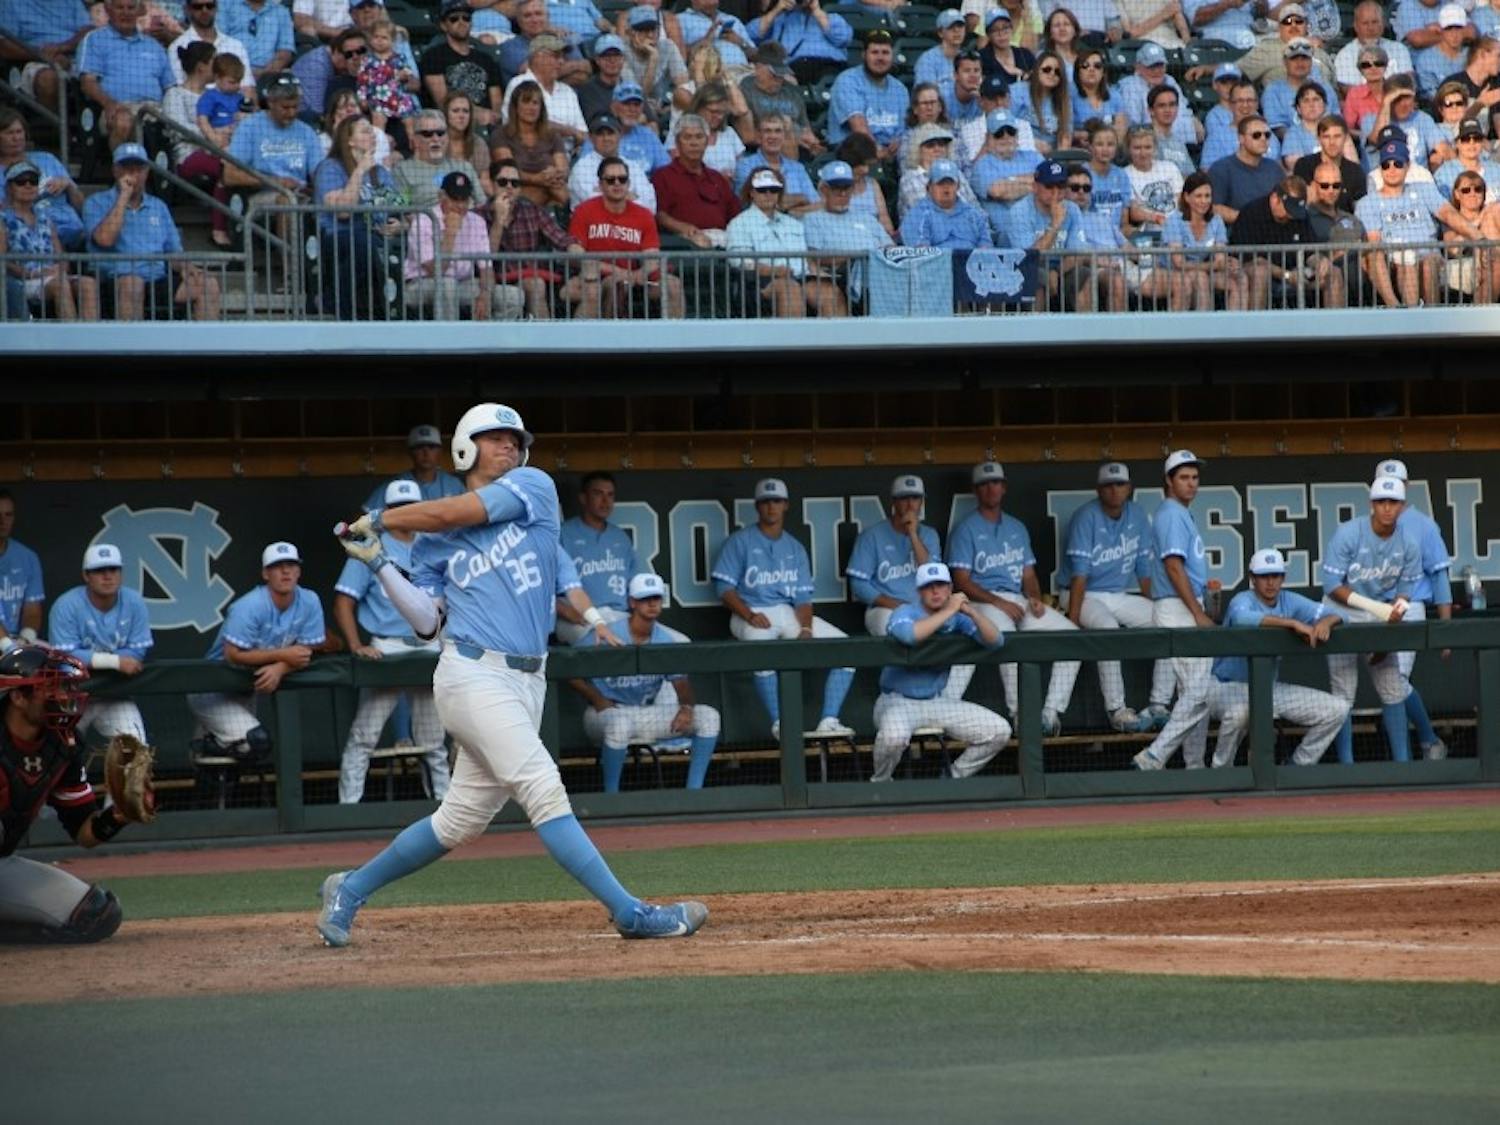 The UNC baseball team hosted the 2017 Chapel Hill Regional last summer, its first time hosting NCAA Tournament games since 2013.